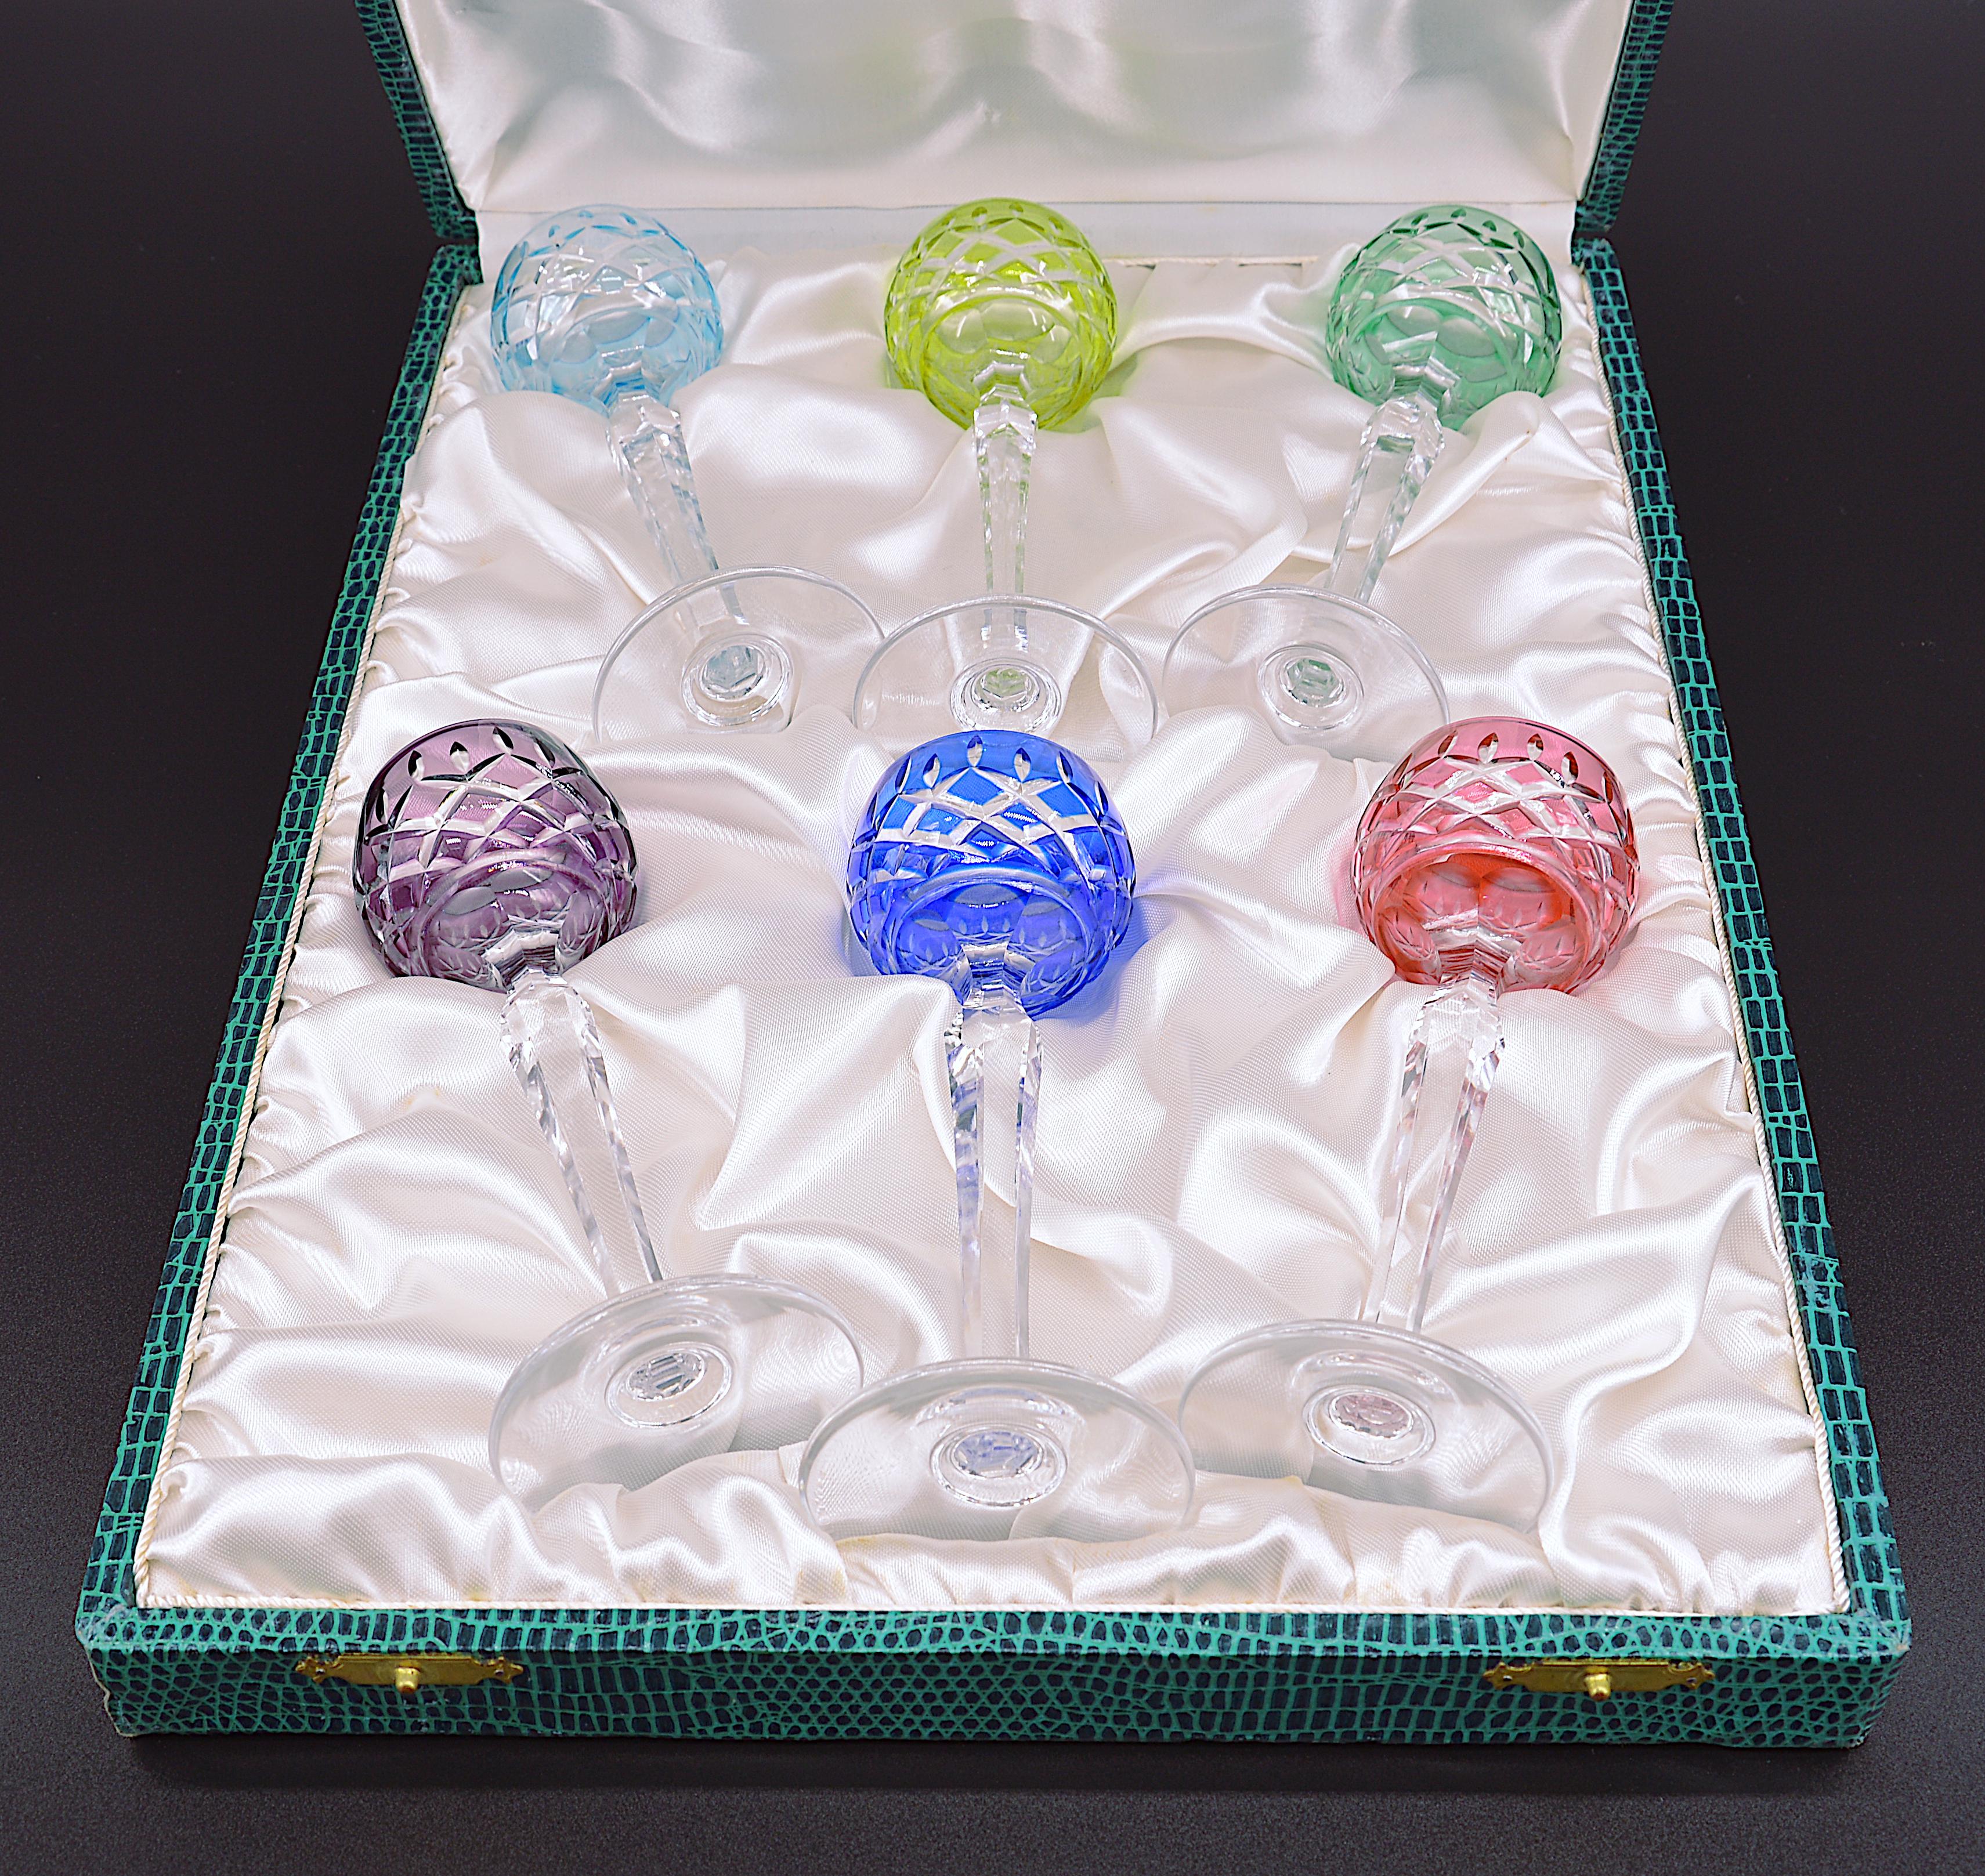 Art Deco Cristallerie Lorraine Set of 6 Colored Crystal Glasses in Their Box France, 1920